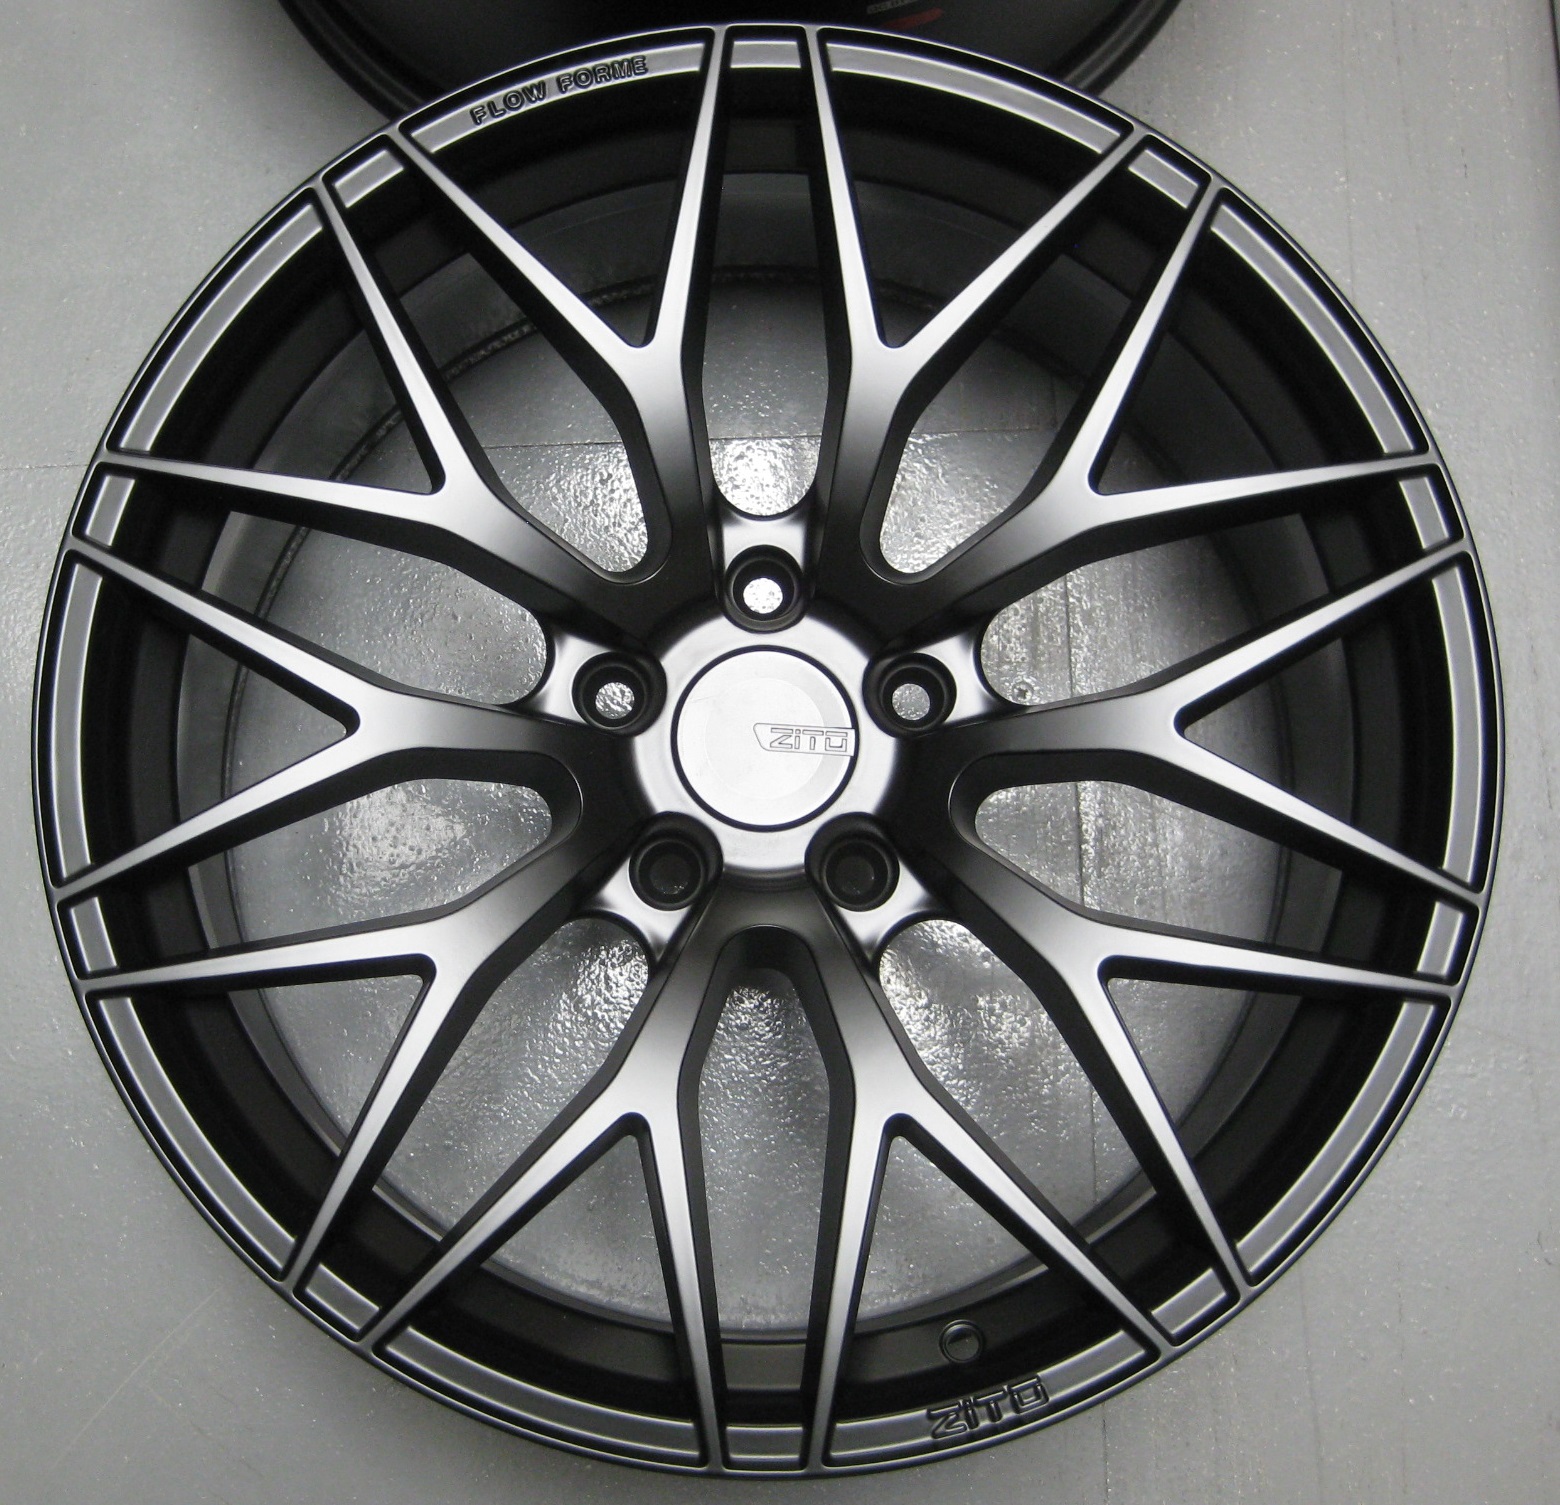 zito-zf01-mesh-rotory-forged-concave-wheels.jpg